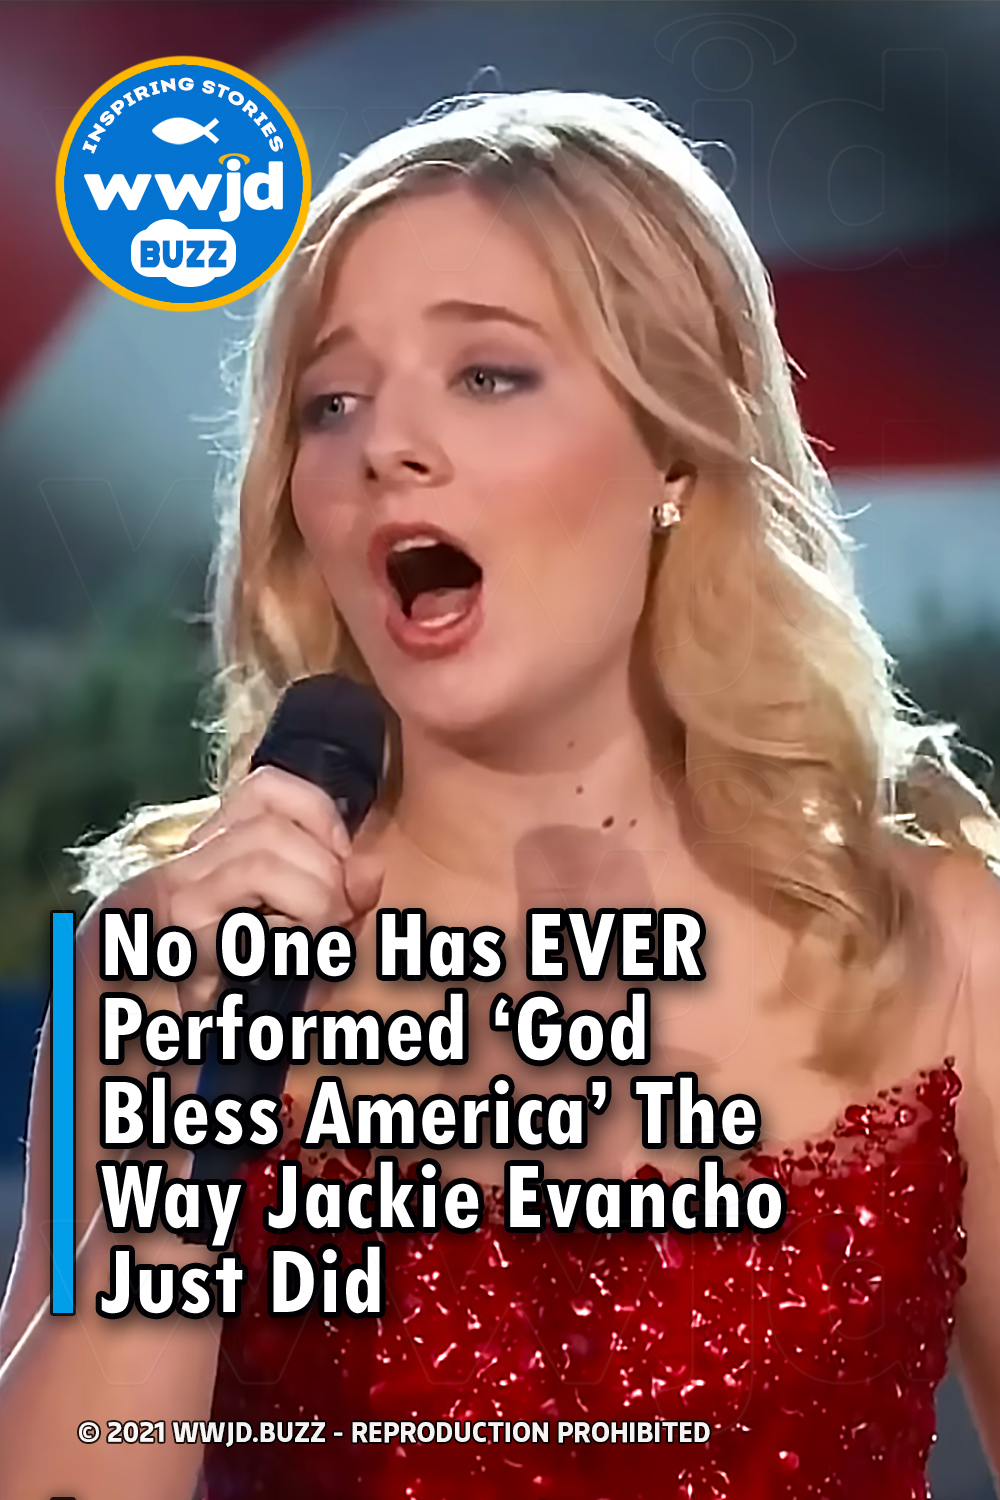 No One Has EVER Performed ‘God Bless America’ The Way Jackie Evancho Just Did